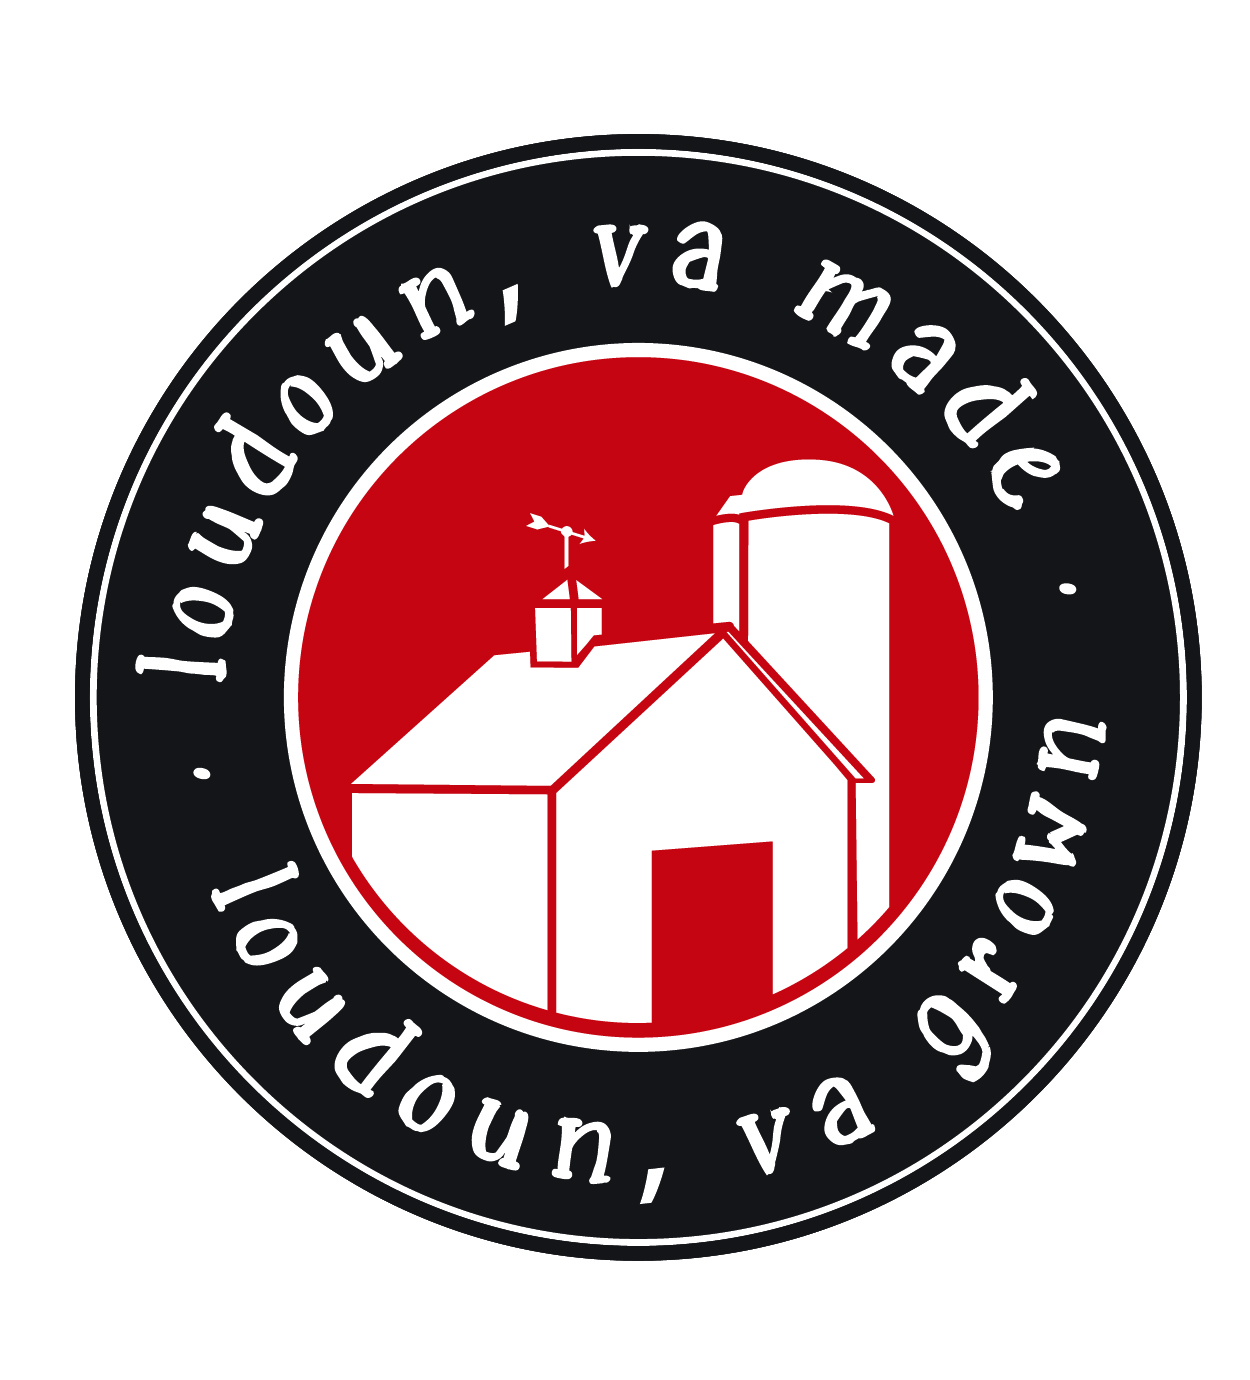 The Loudoun County Department of Economic Development supports the Loudoun County Barn Quilt Trail